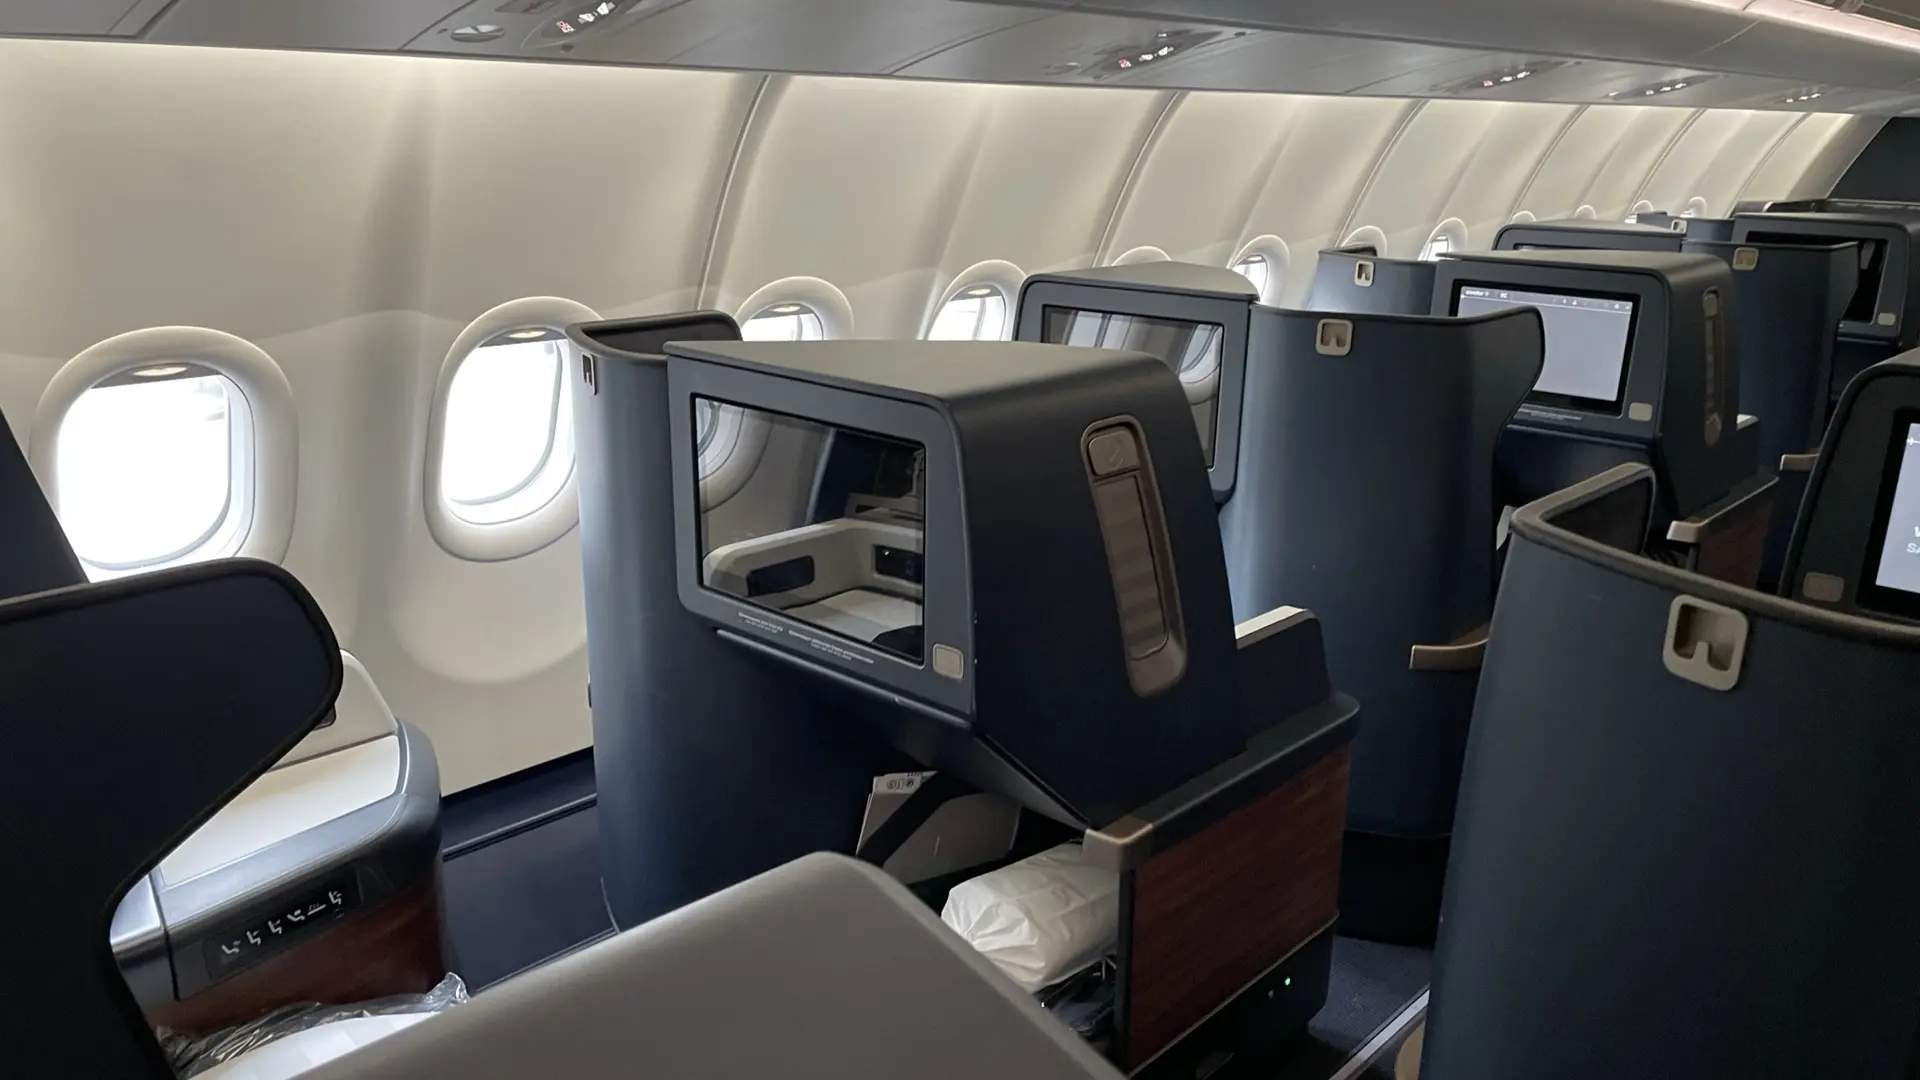 Airline review Cabin & Seat - Condor - 11